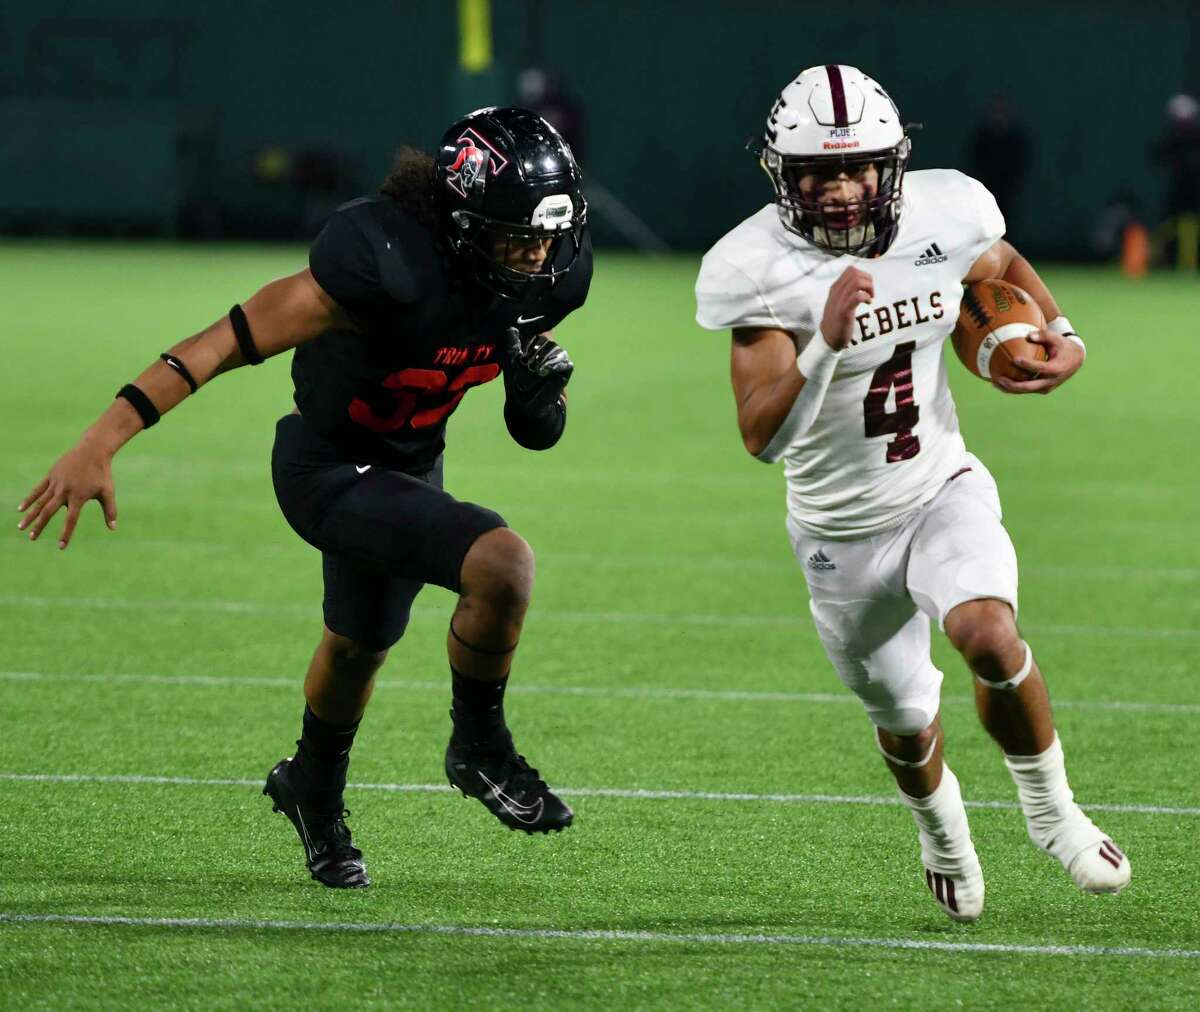 Lee’s Mikey Serrano (4) runs in for a touchdown as Trinity’s Siosifa Leota (33) closes in Saturday, Dec. 19, 2020 at Globe Life Park in Arlington. Jacy Lewis/Reporter-Telegram